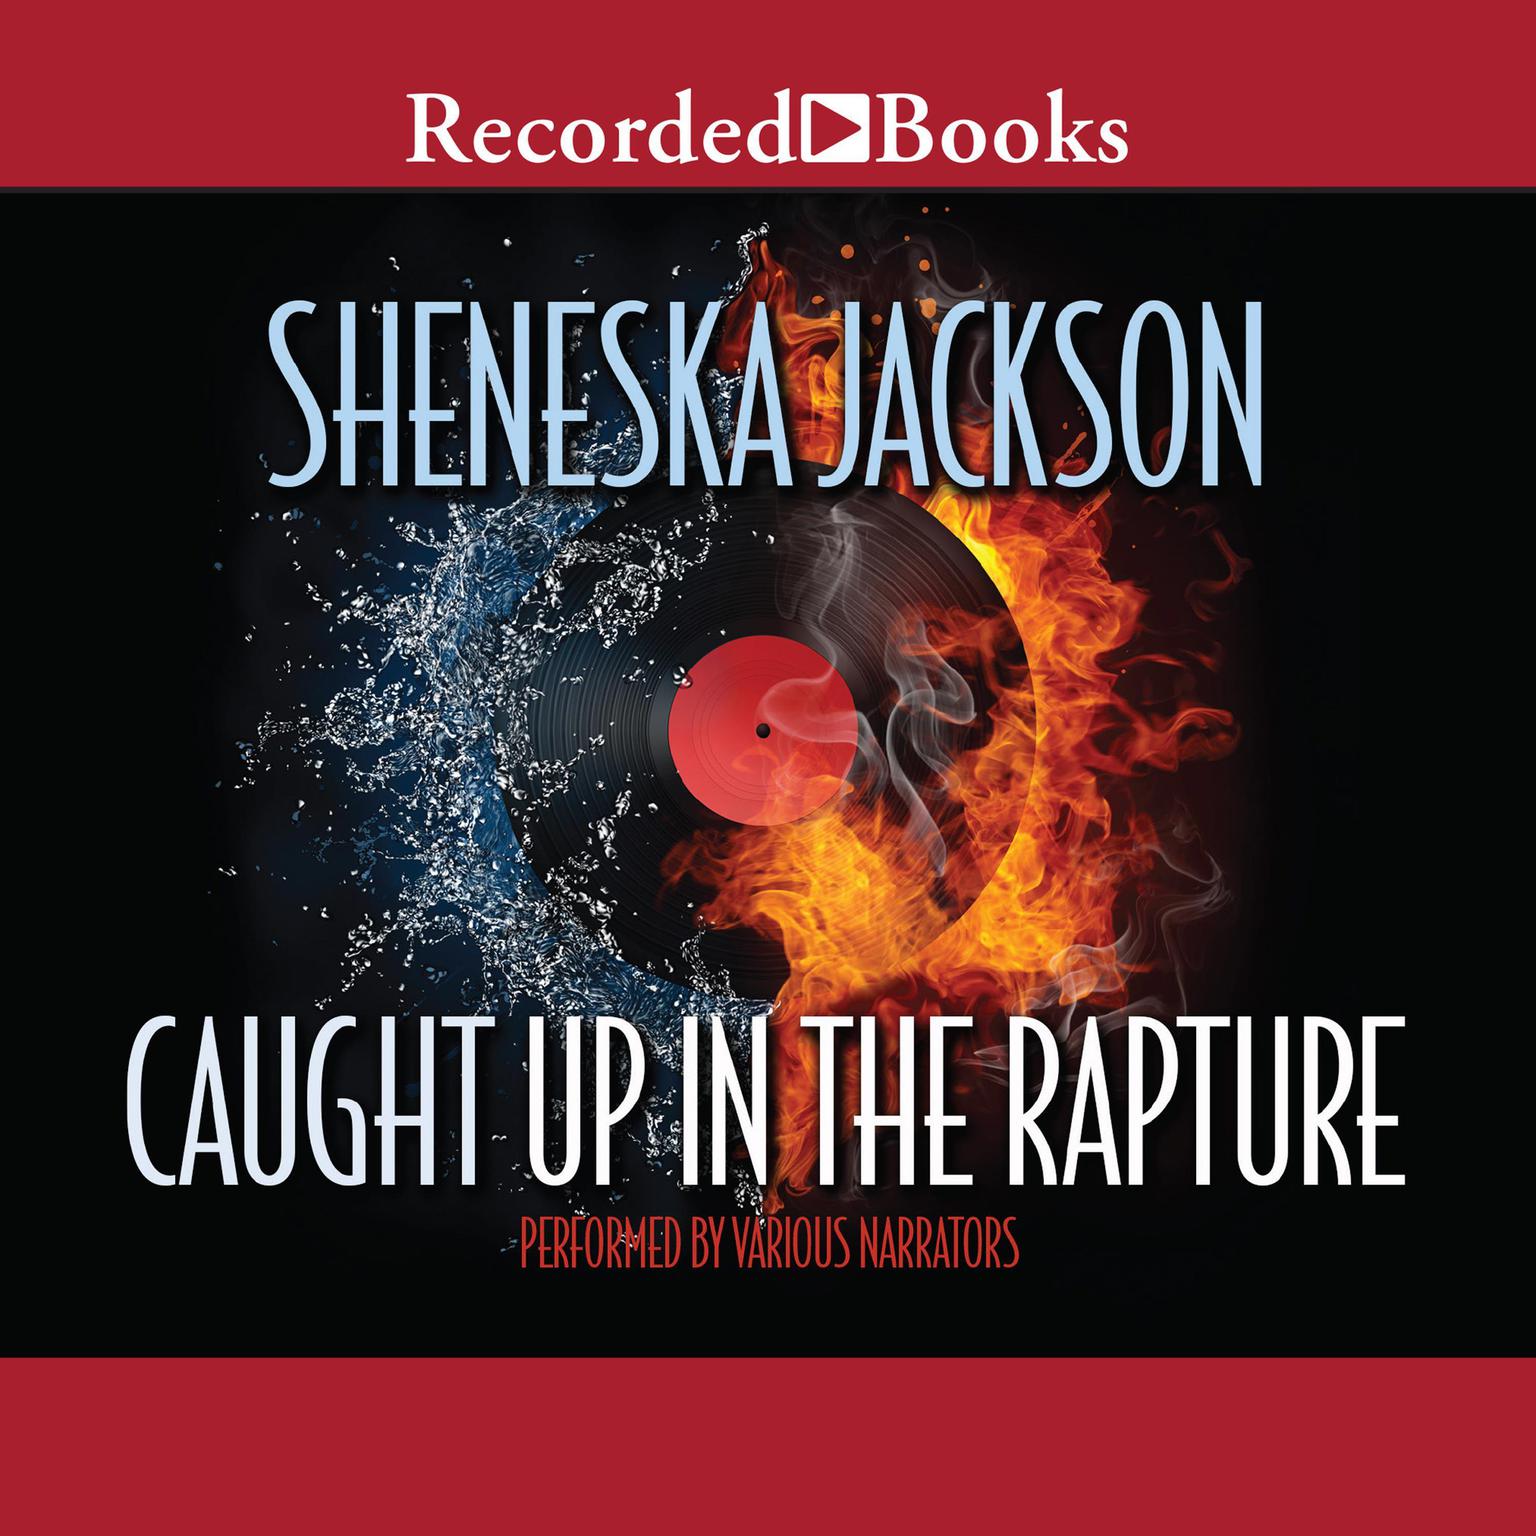 Caught Up in the Rapture Audiobook, by Sheneska Jackson